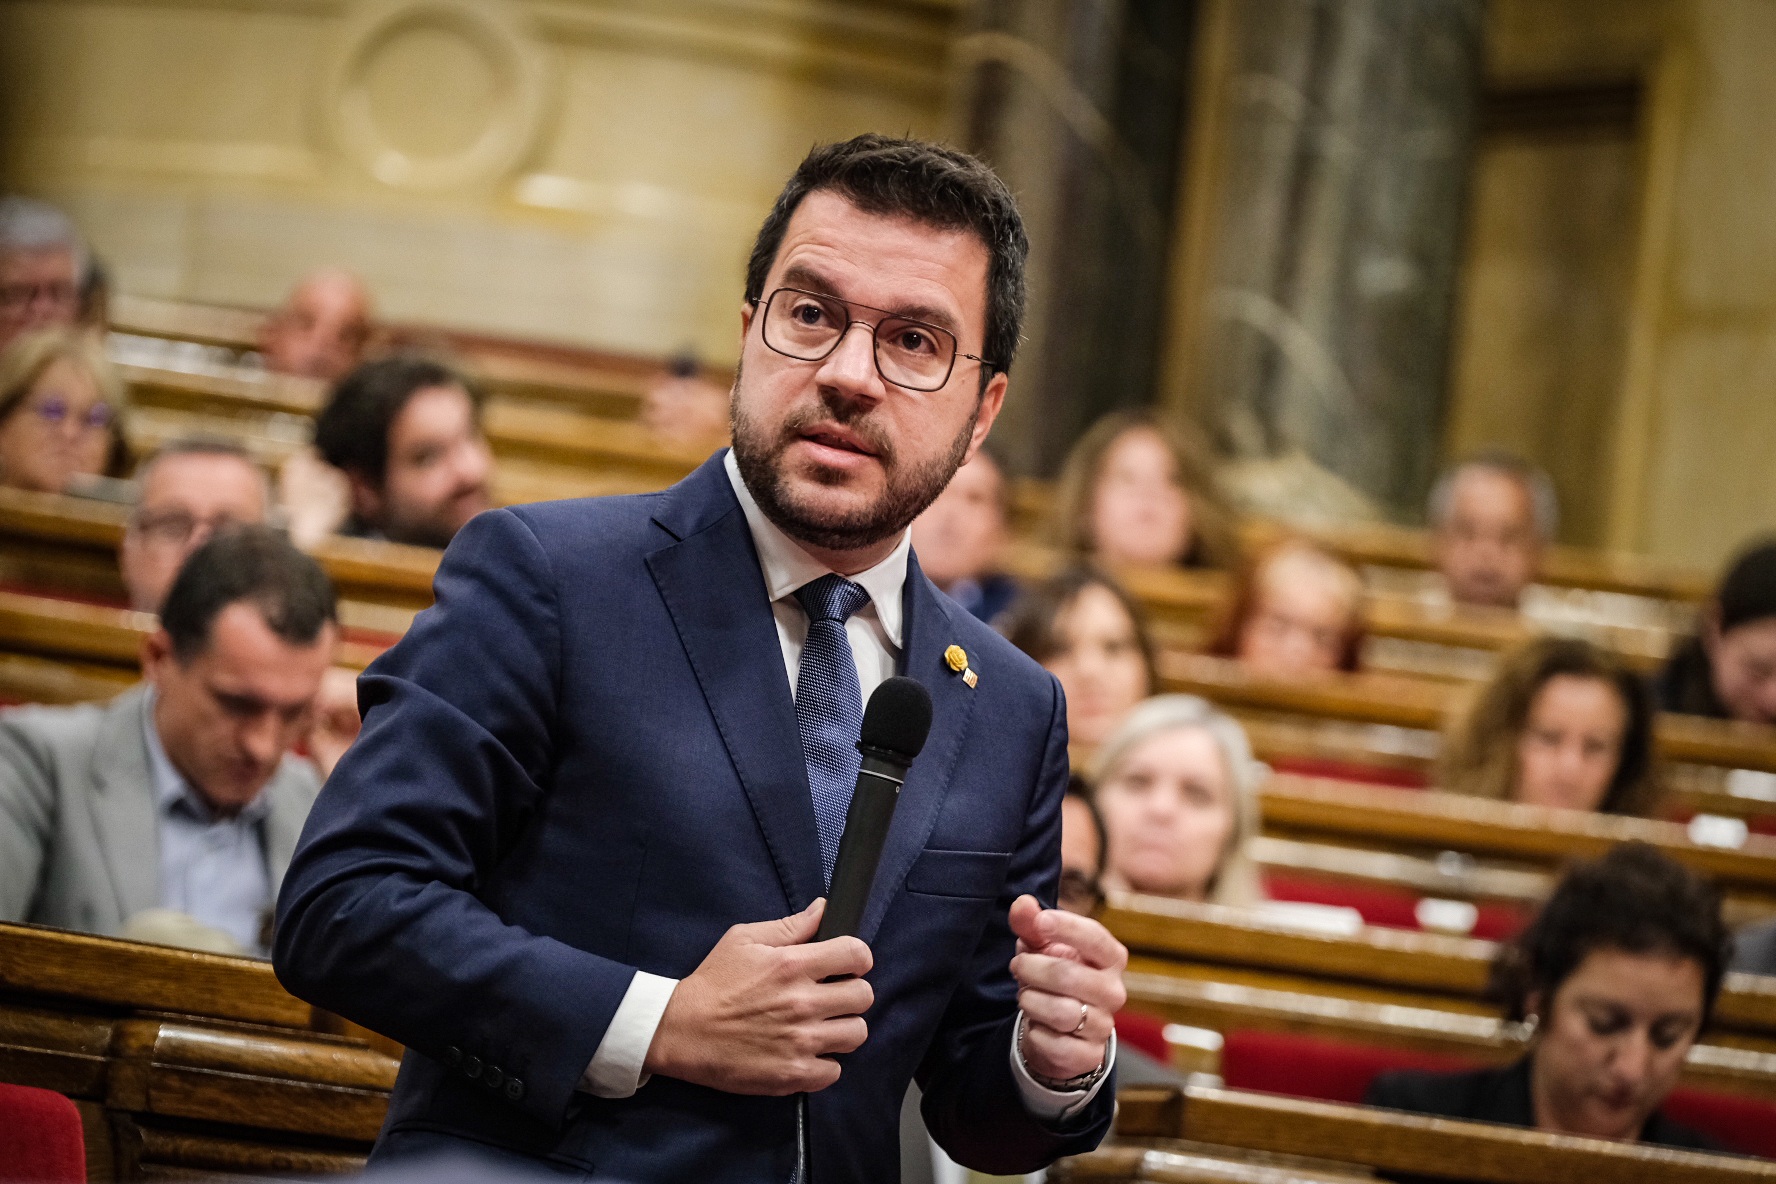 Aragonès asks MPs not to feed a "growing polarization" in Catalonia over Israel-Hamas conflict